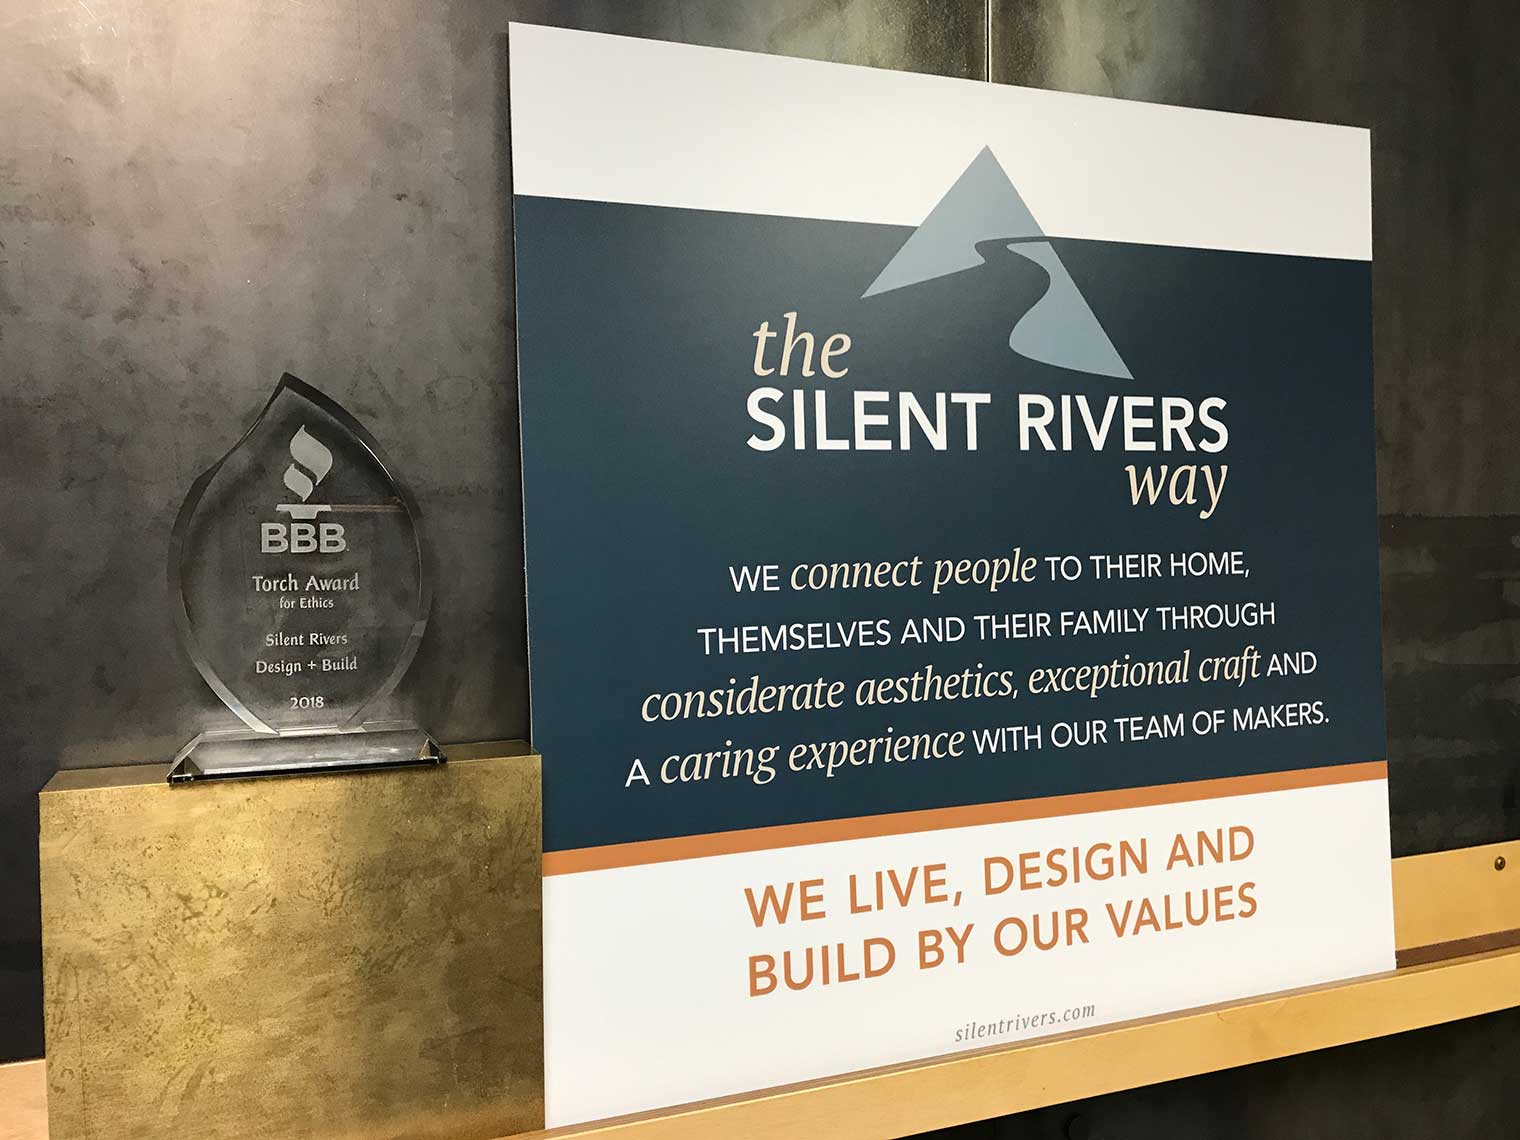 Silent Rivers way mission statement and BBB Torch Award